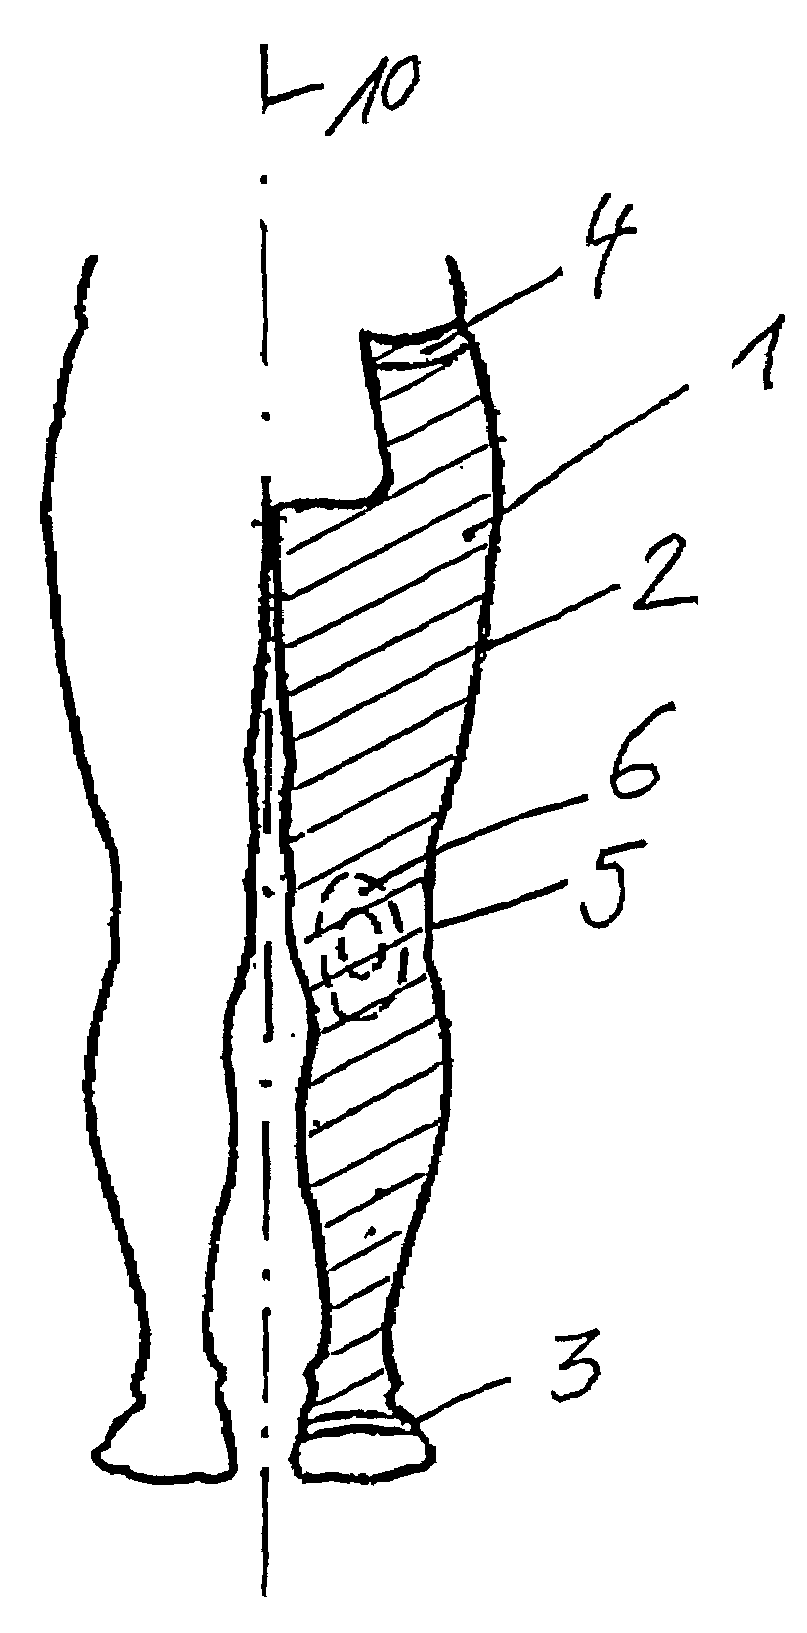 Compression support stocking with a compression support body